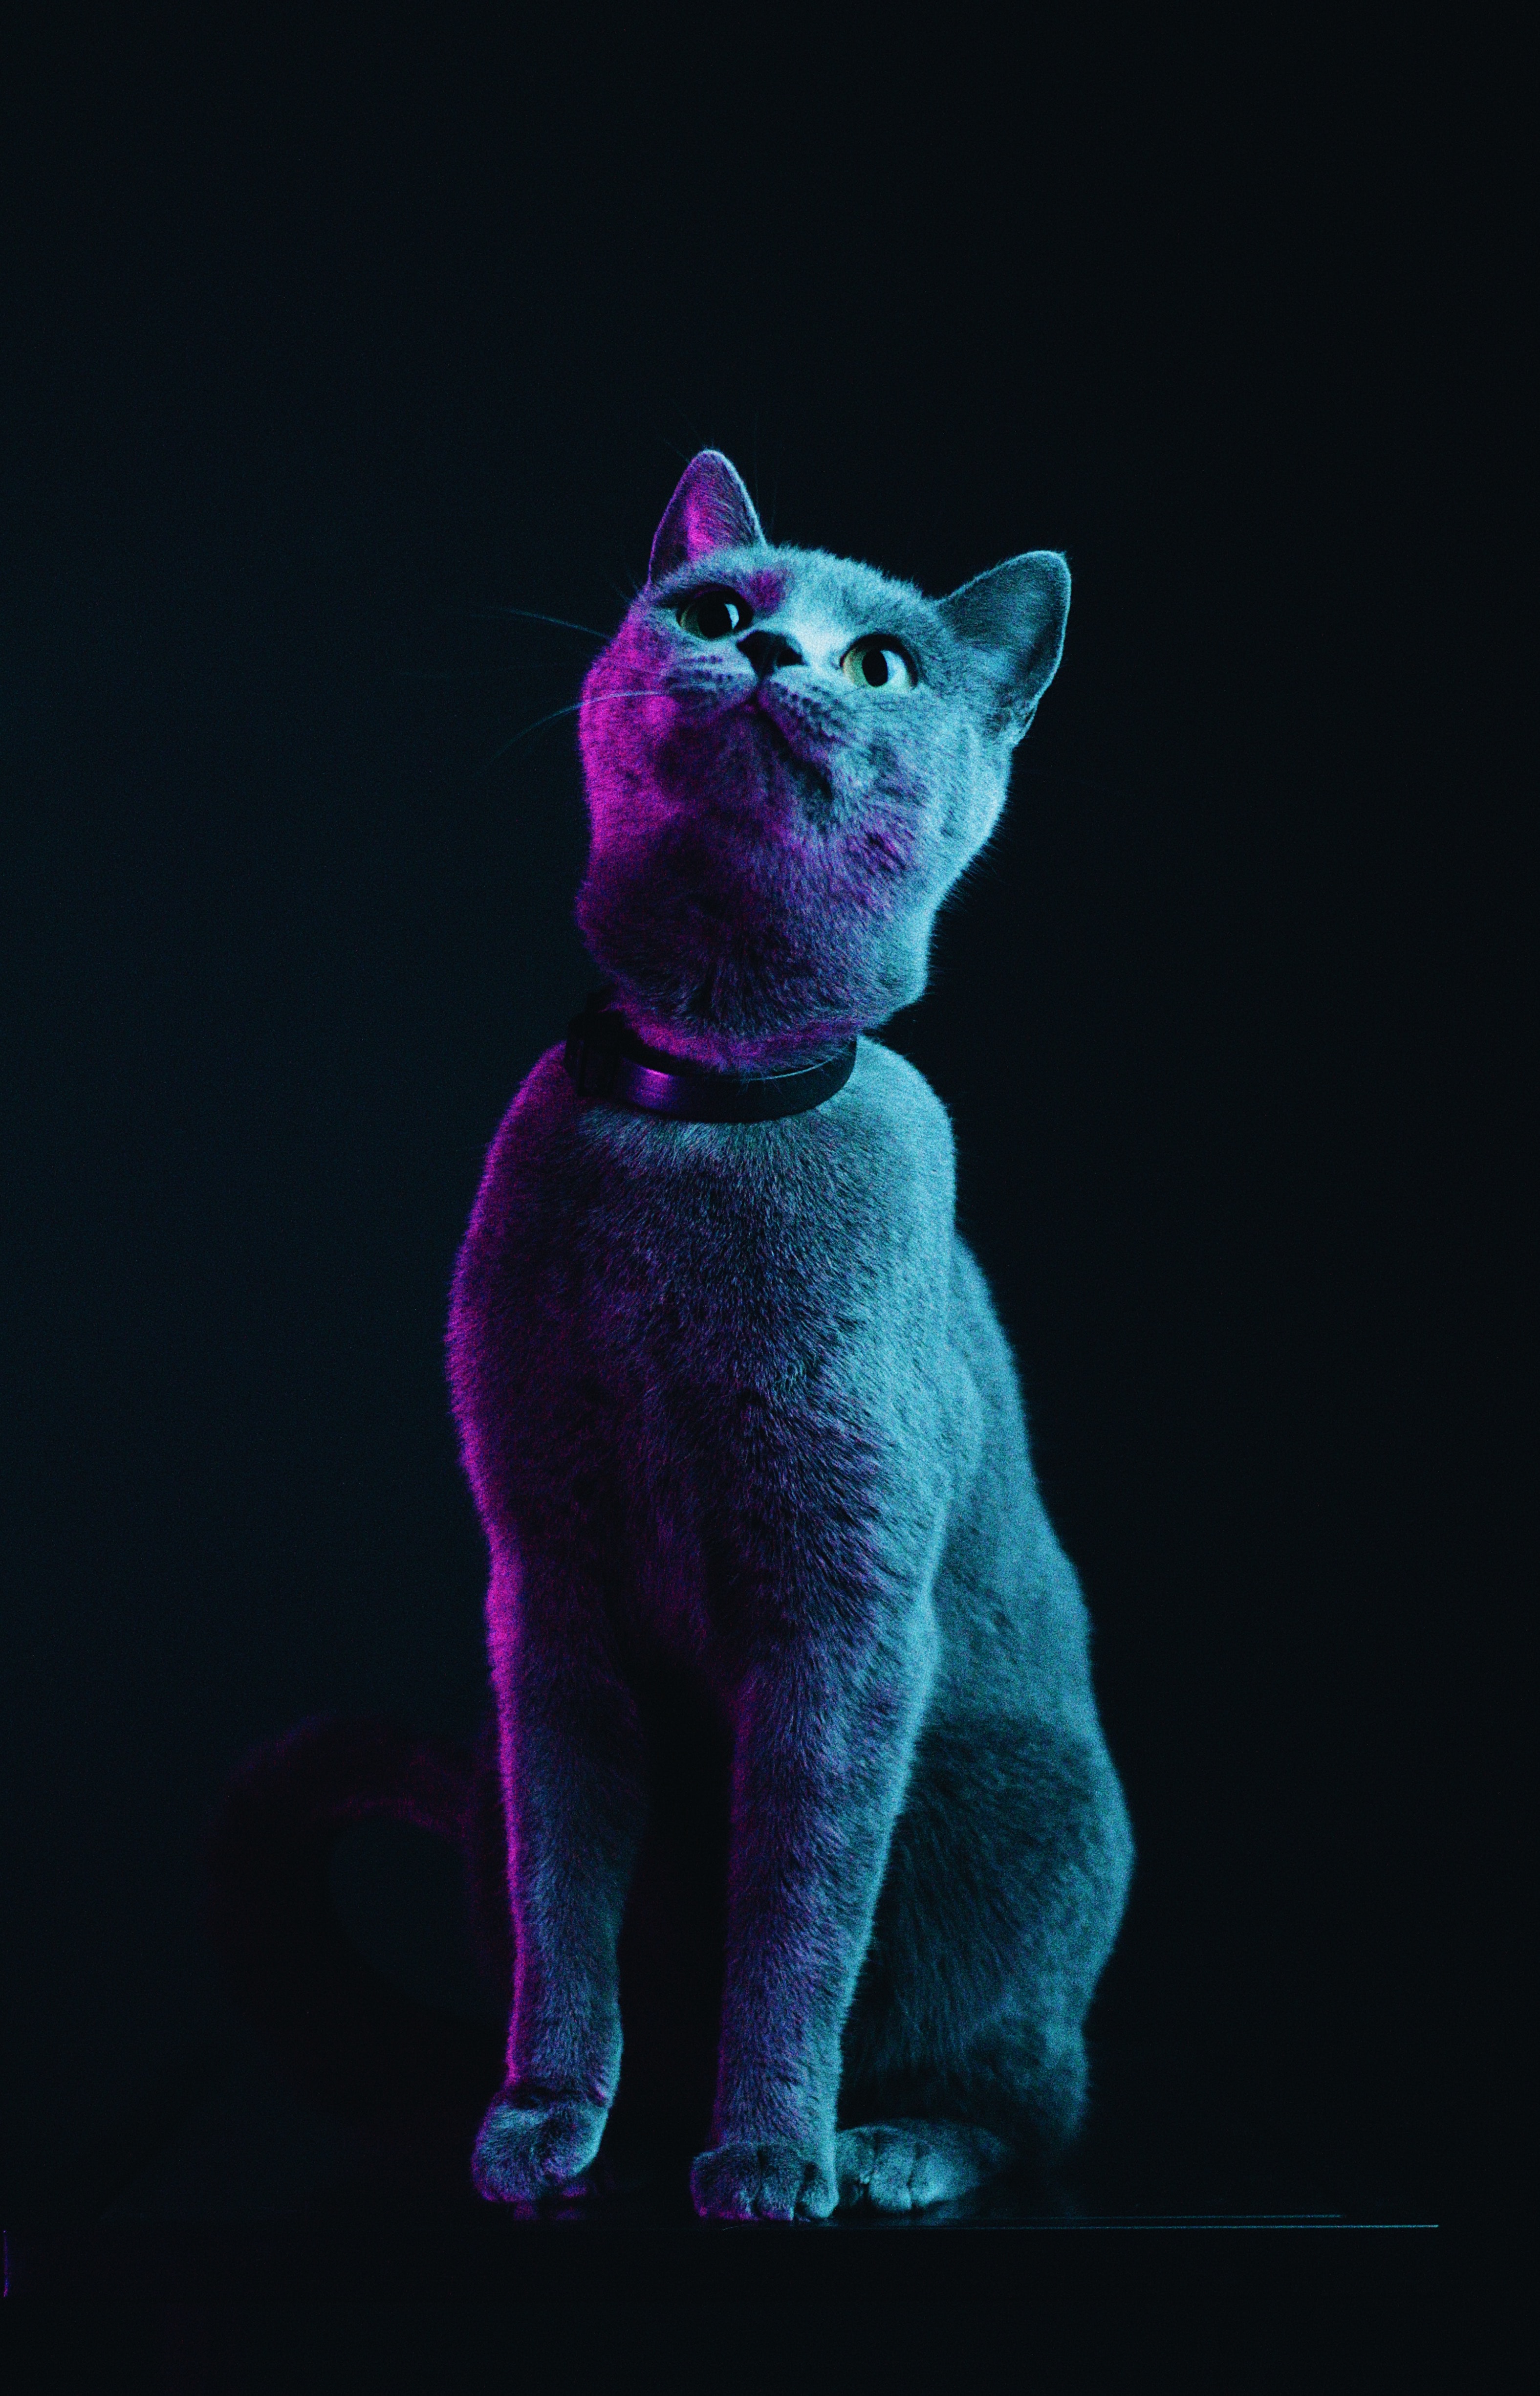 100452 download wallpaper neon, animals, cat, pet, grey screensavers and pictures for free